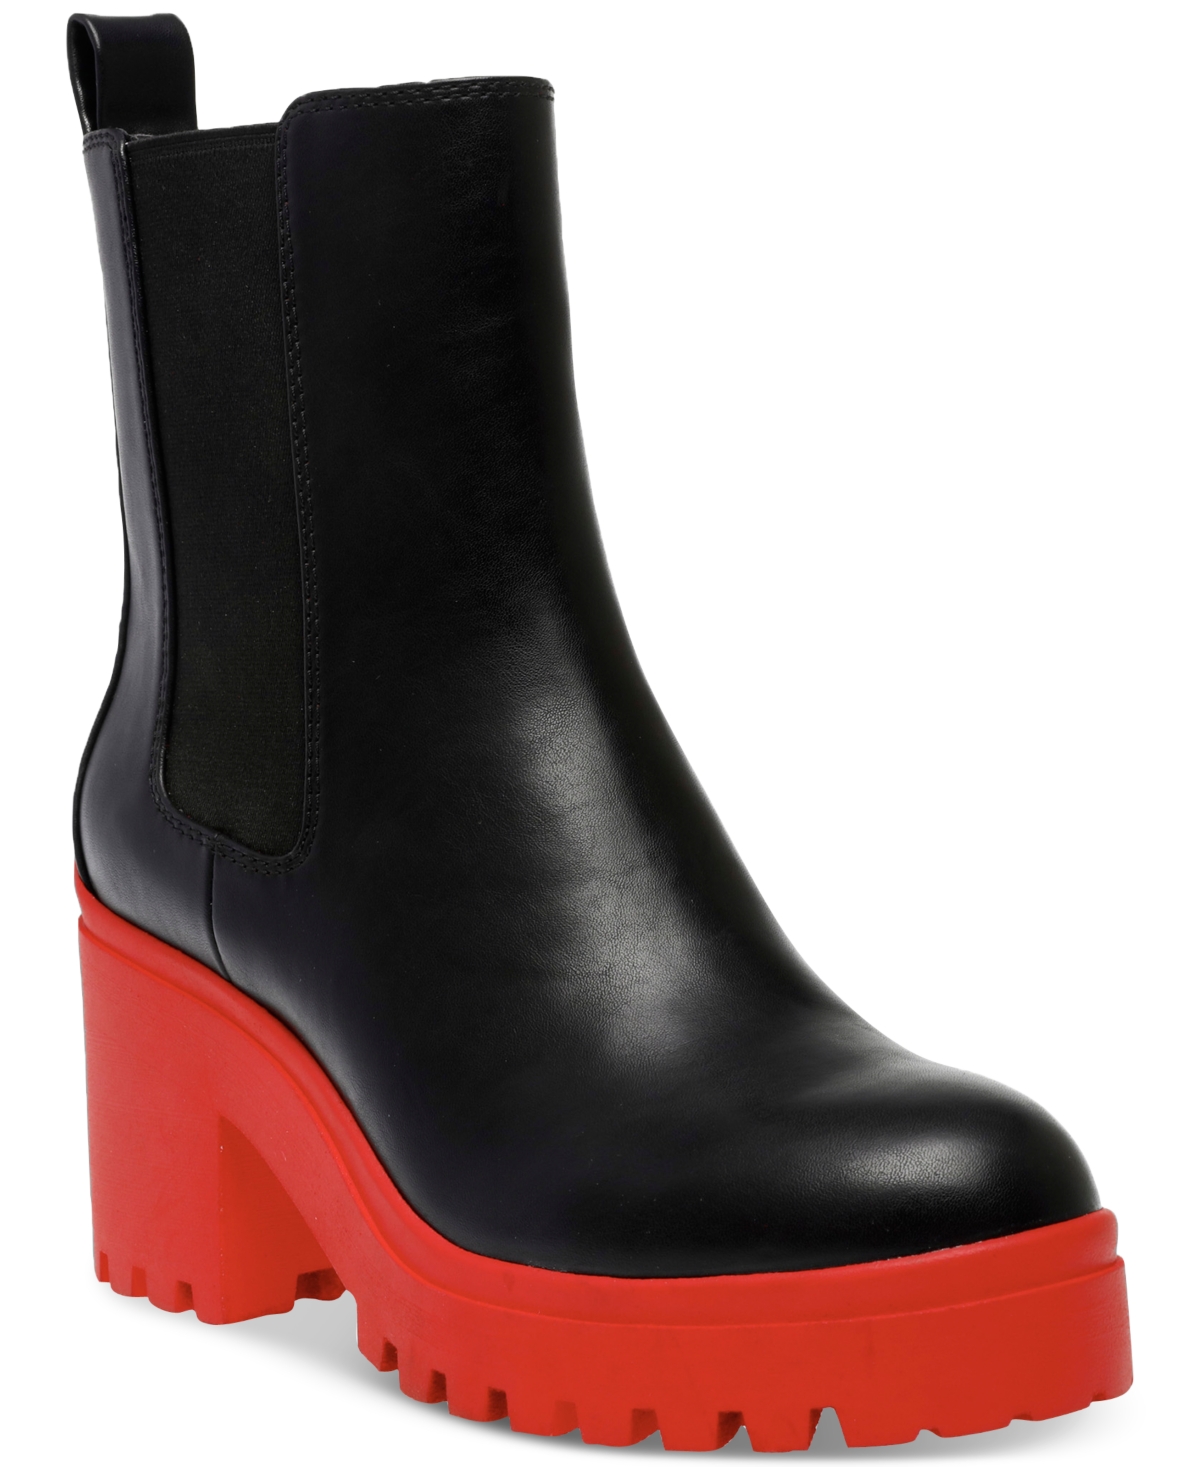 Brooklan Chelsea Booties, Created for Macy's - Black with Red Sole